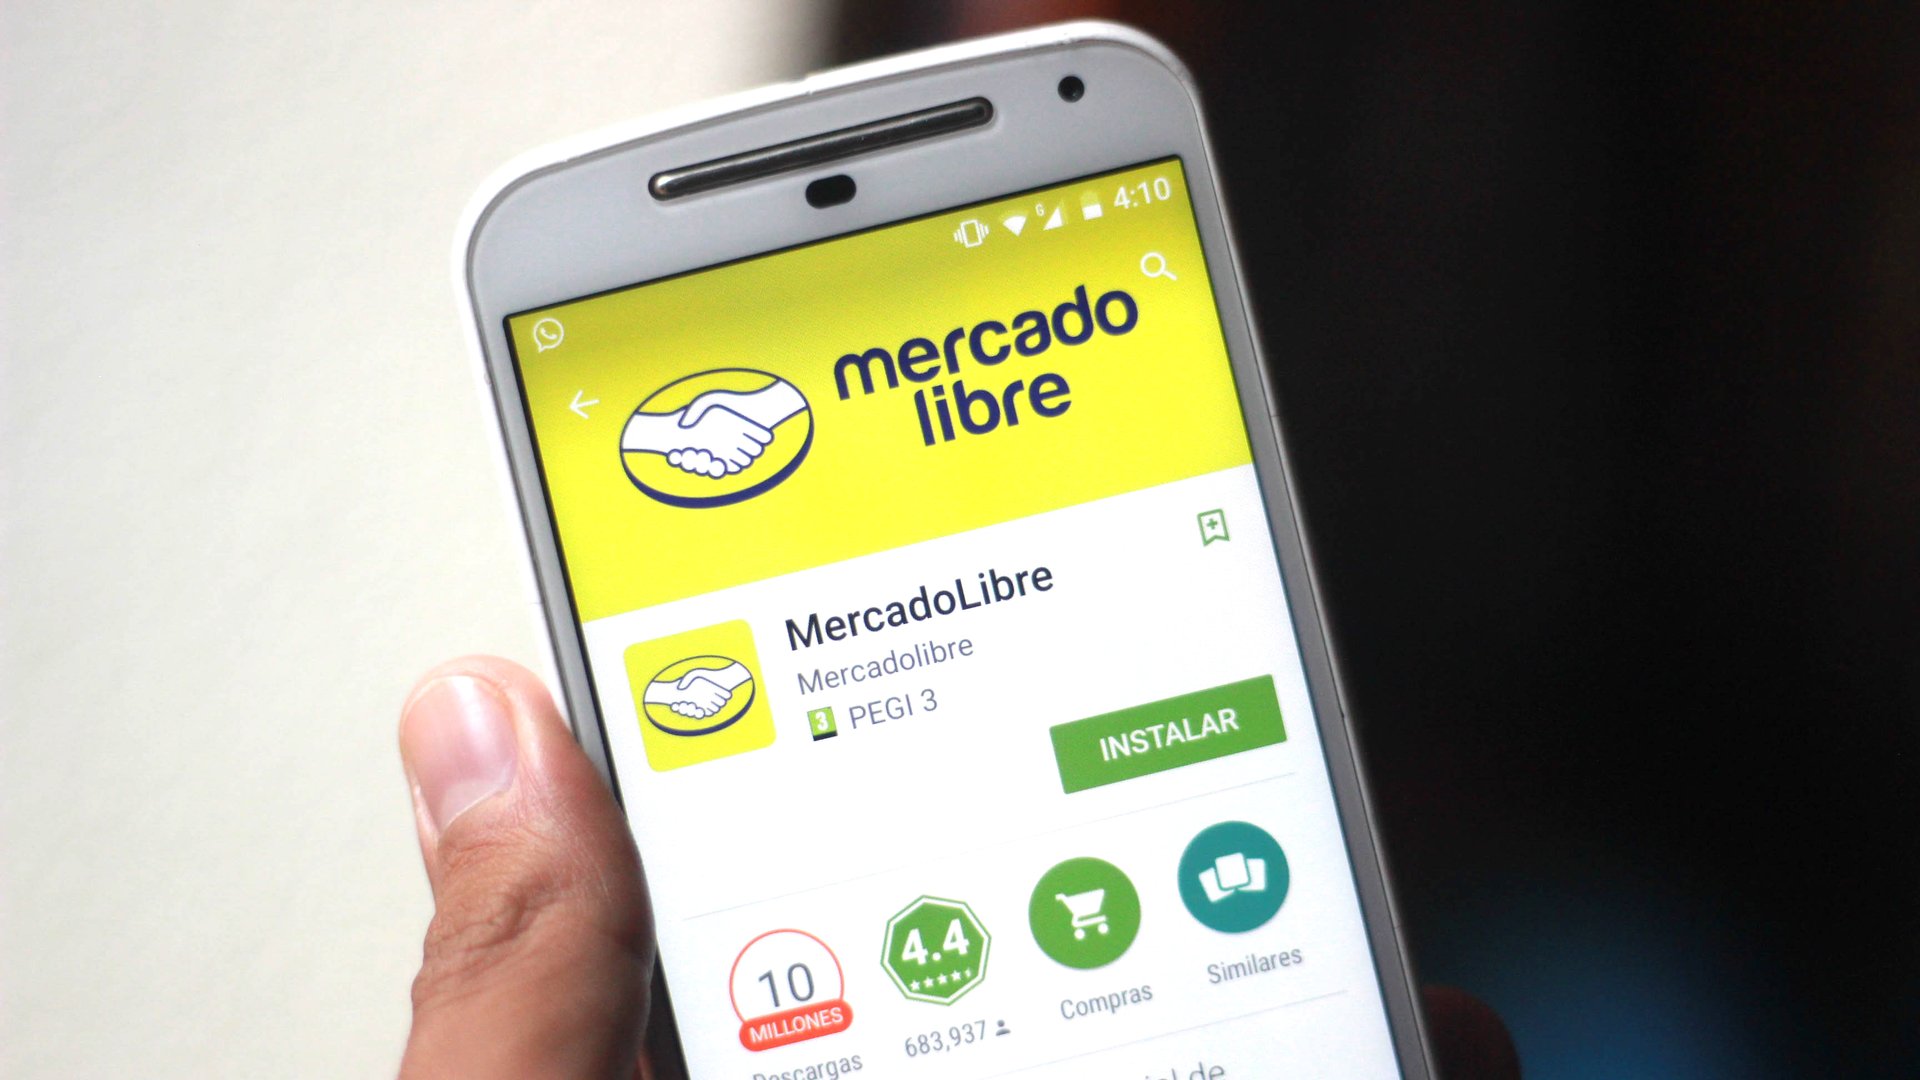 MercadoLibre application are displayed in the app store on a mobile phone.